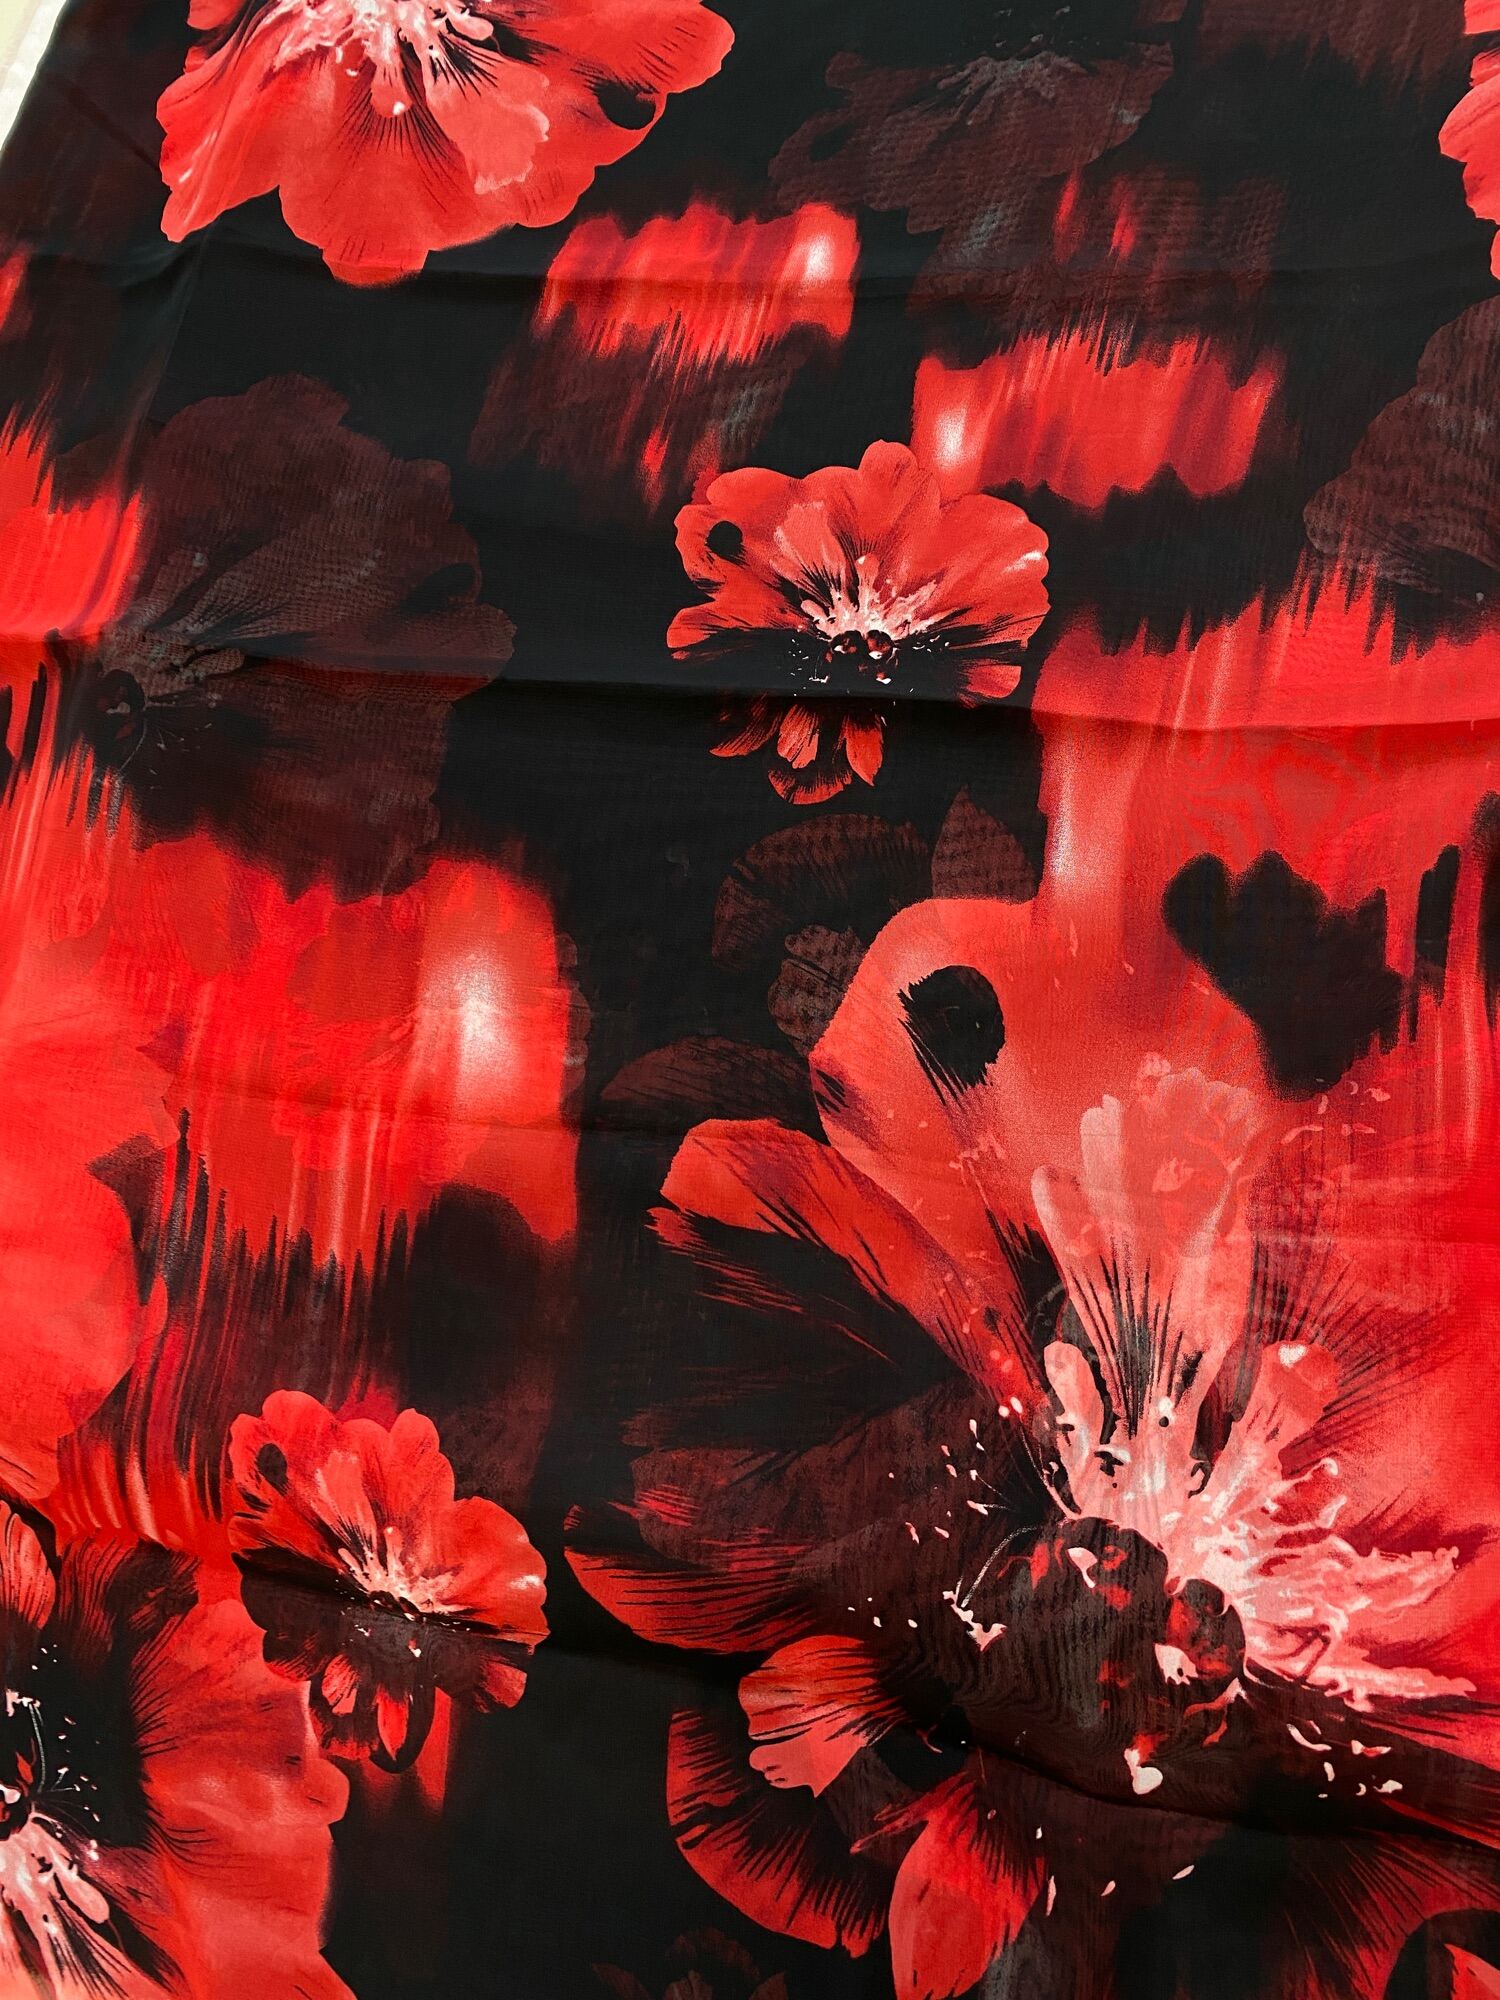 Vải voan chiffon đen hoa đỏ - Black chiffon fabric with red flowers, a perfect combination of mystery and allure. The soft texture of chiffon and the boldness of red flowers create a unique and captivating look. Take a look at this image and let yourself be mesmerized by the beauty of vải voan chiffon đen hoa đỏ.